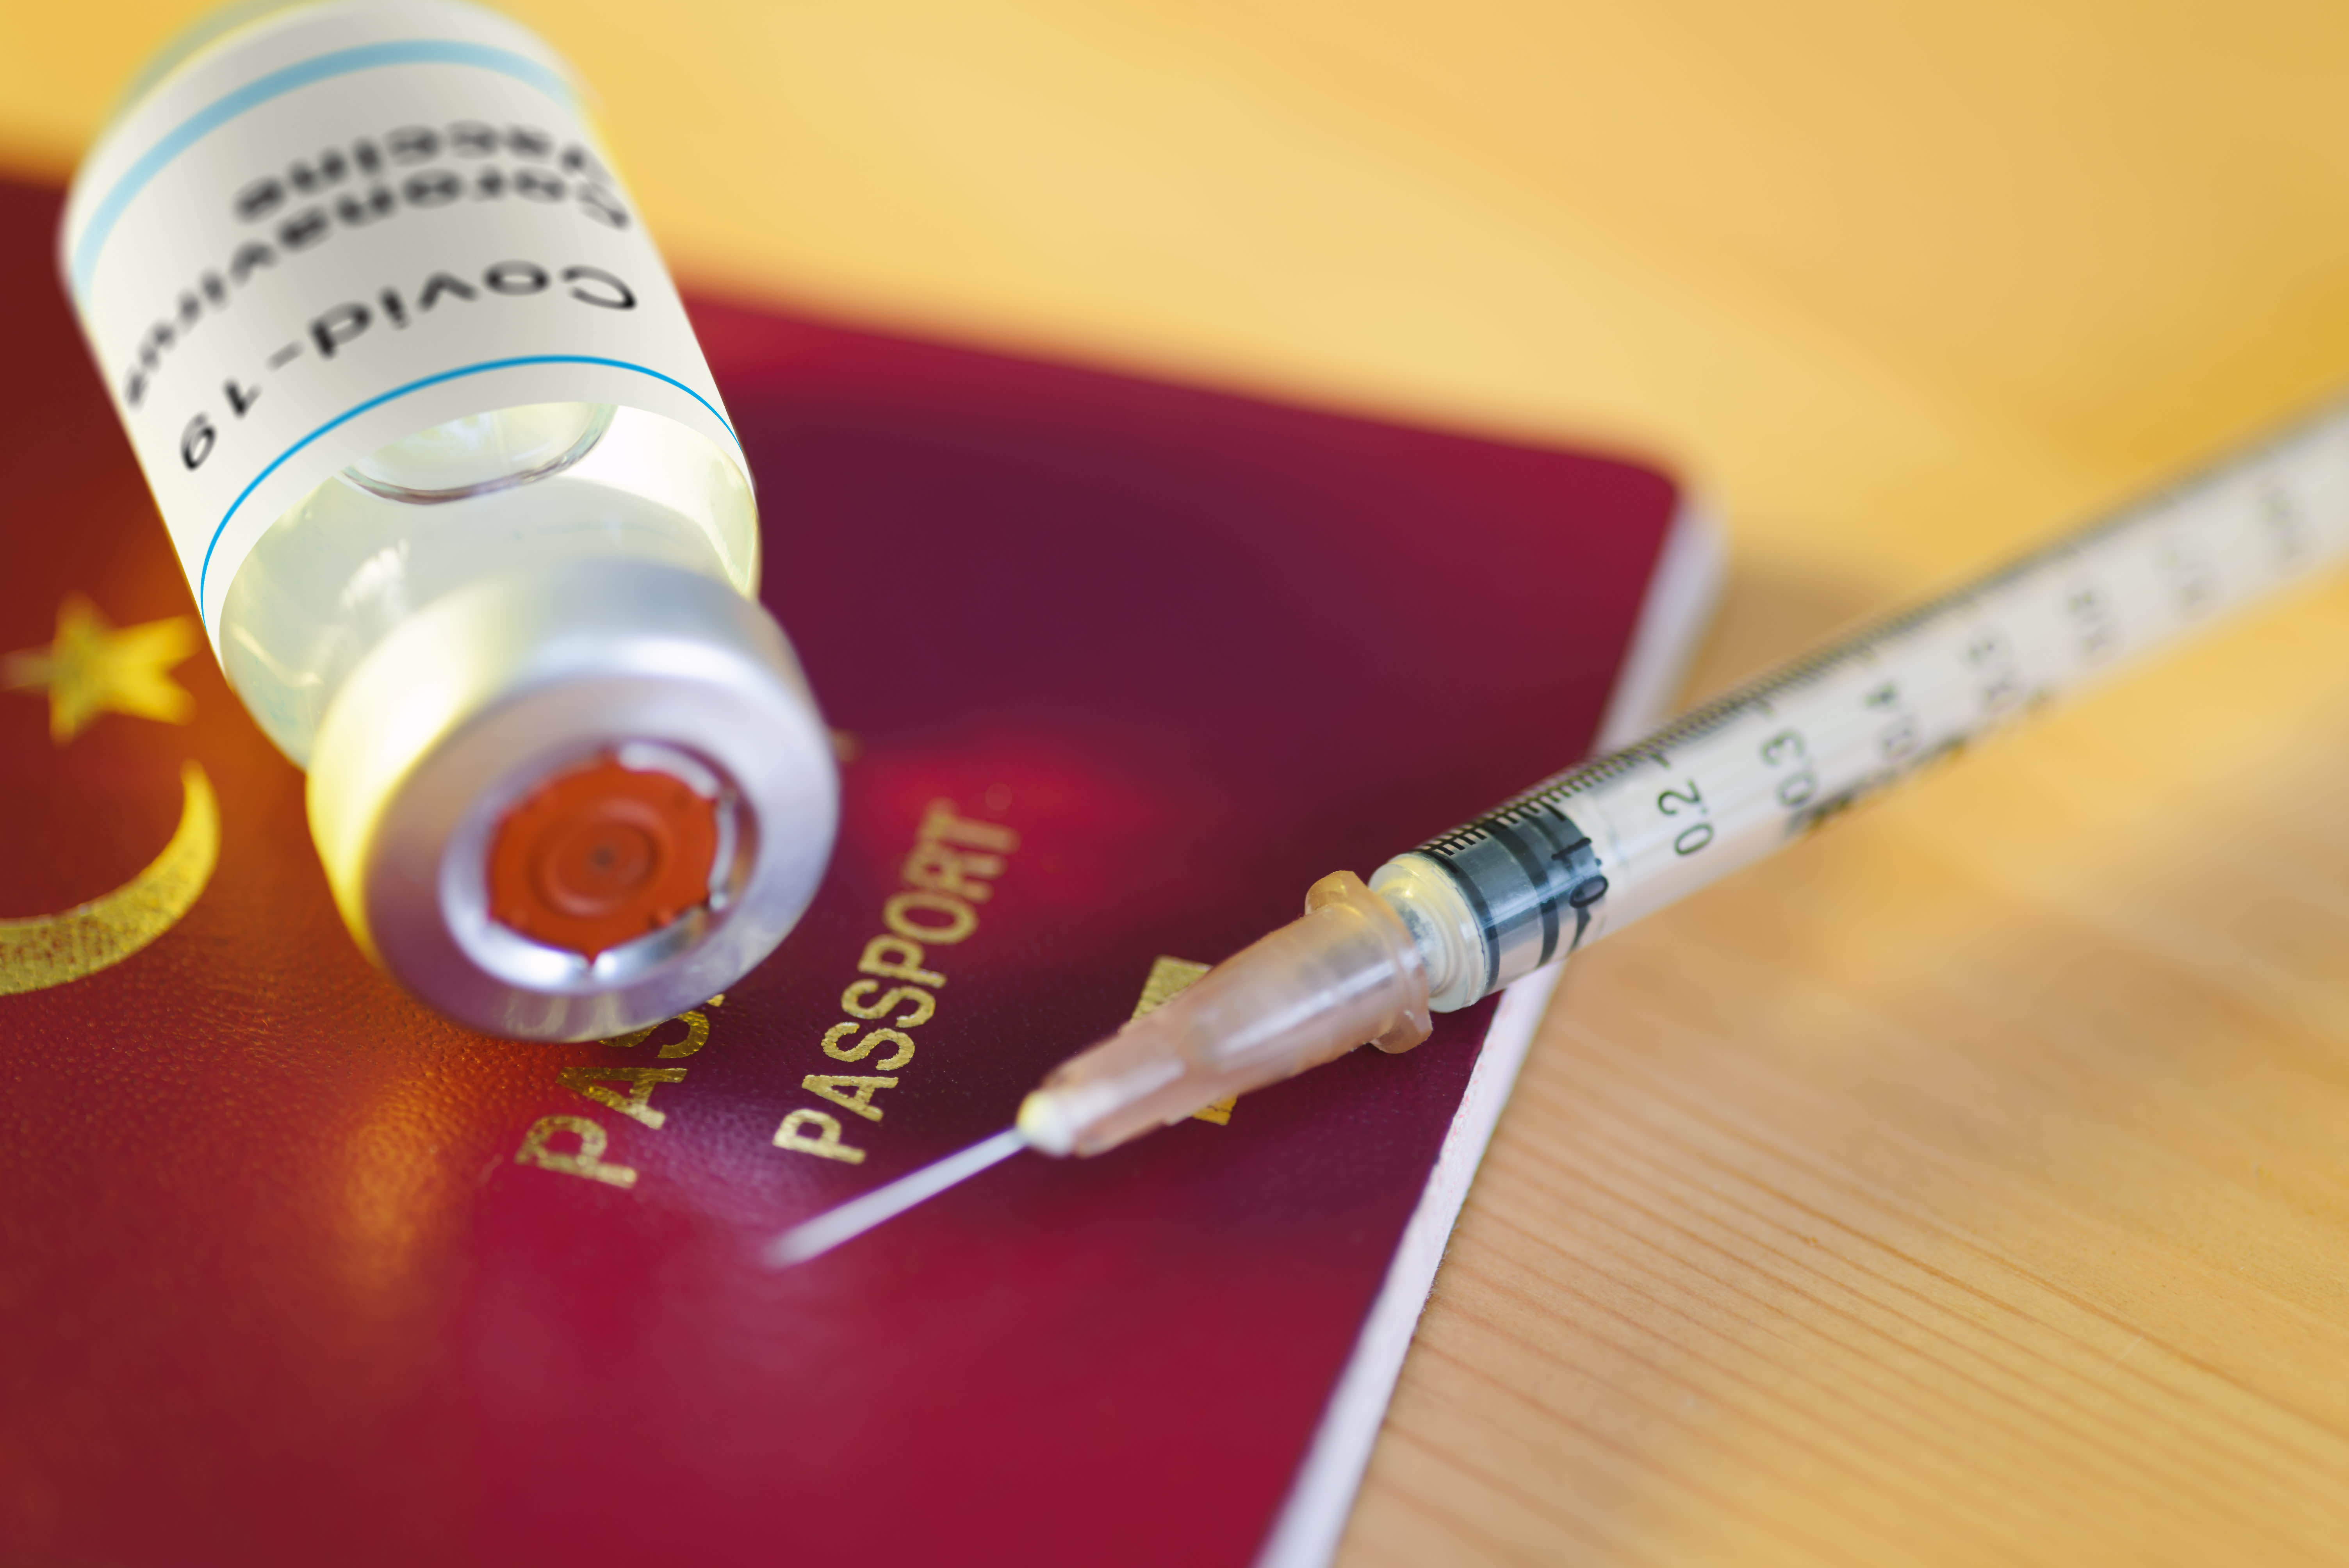 Will I need proof of vaccine to travel abroad?